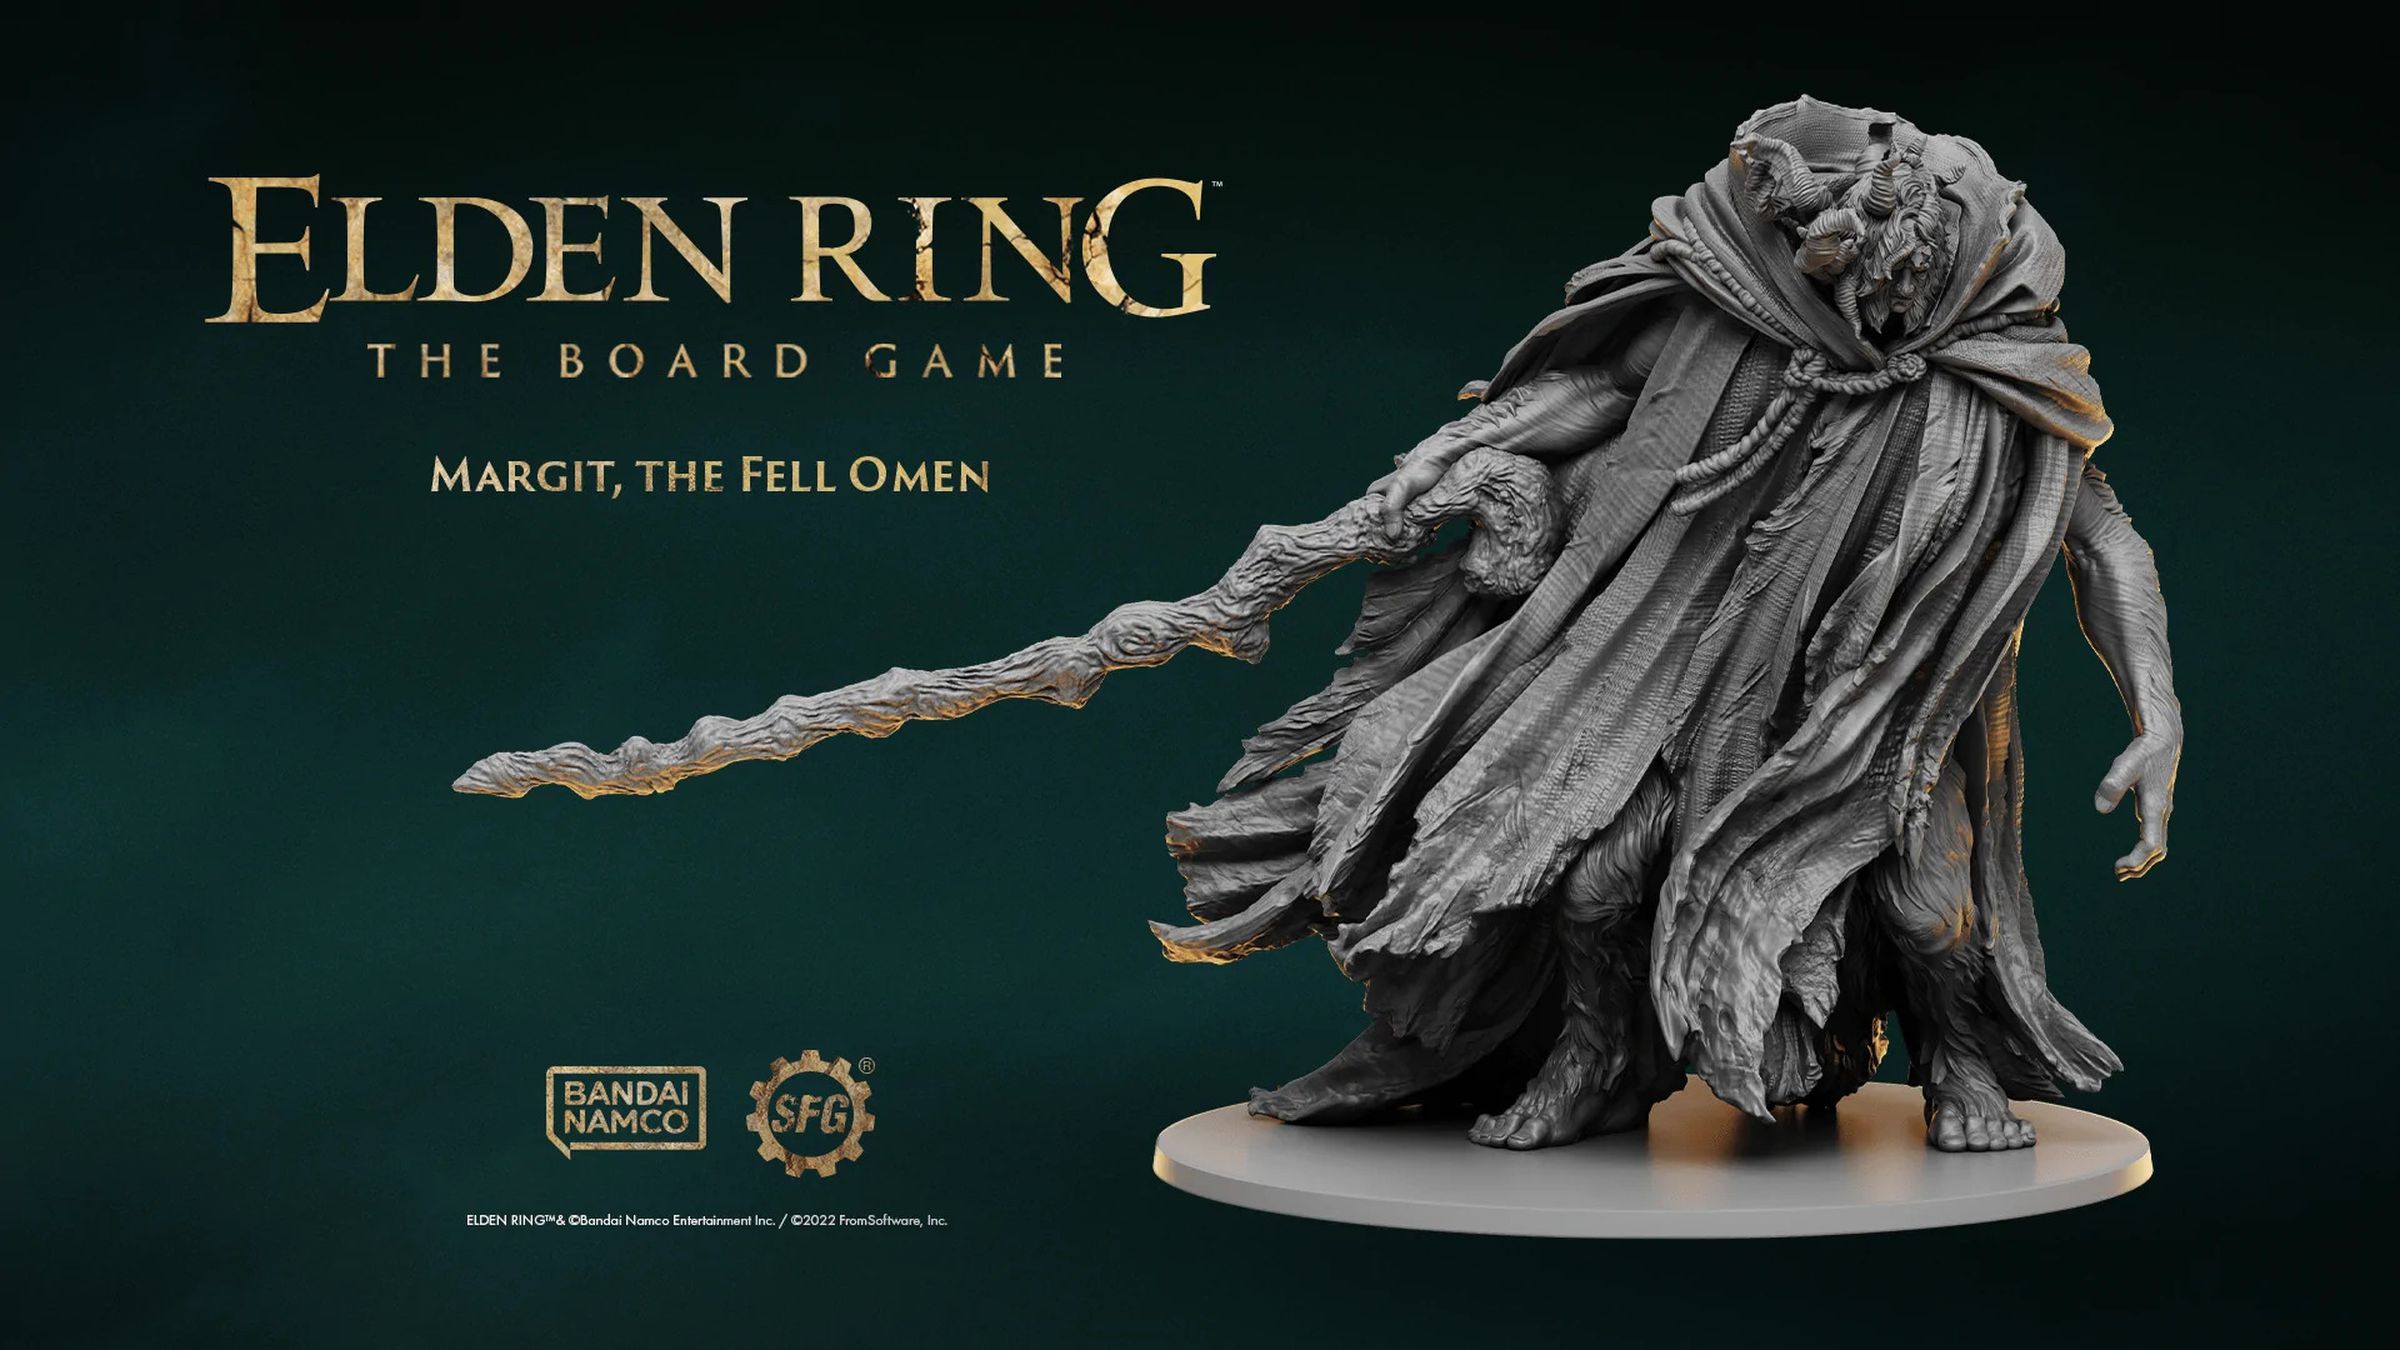 An image showing Elden Ring’s Margit as a board game piece.